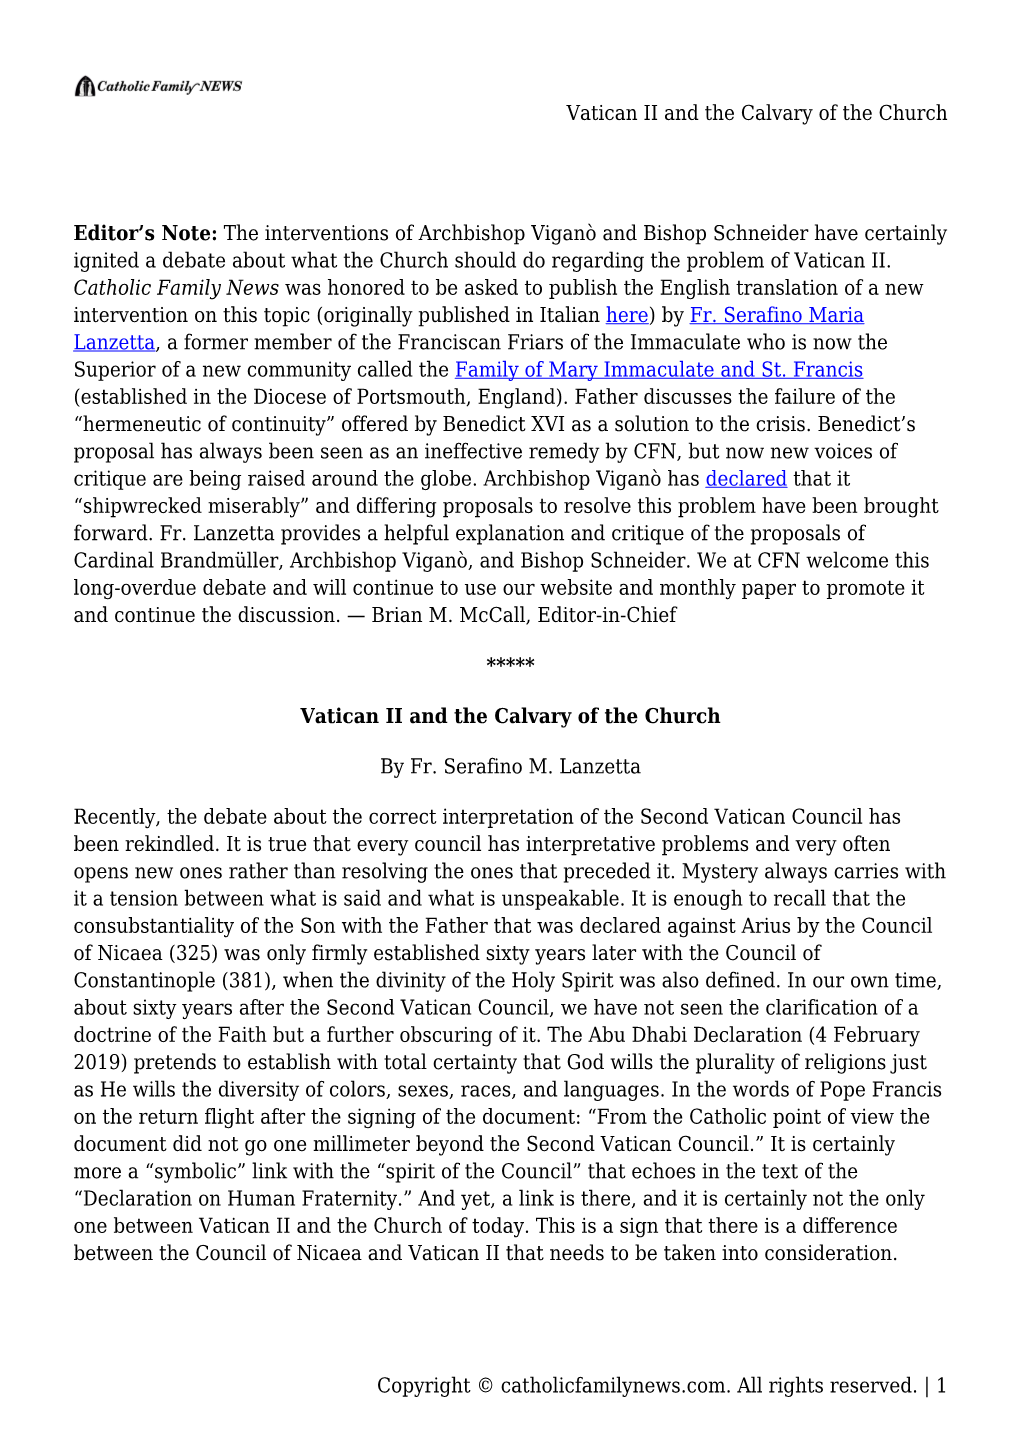 Vatican II and the Calvary of the Church